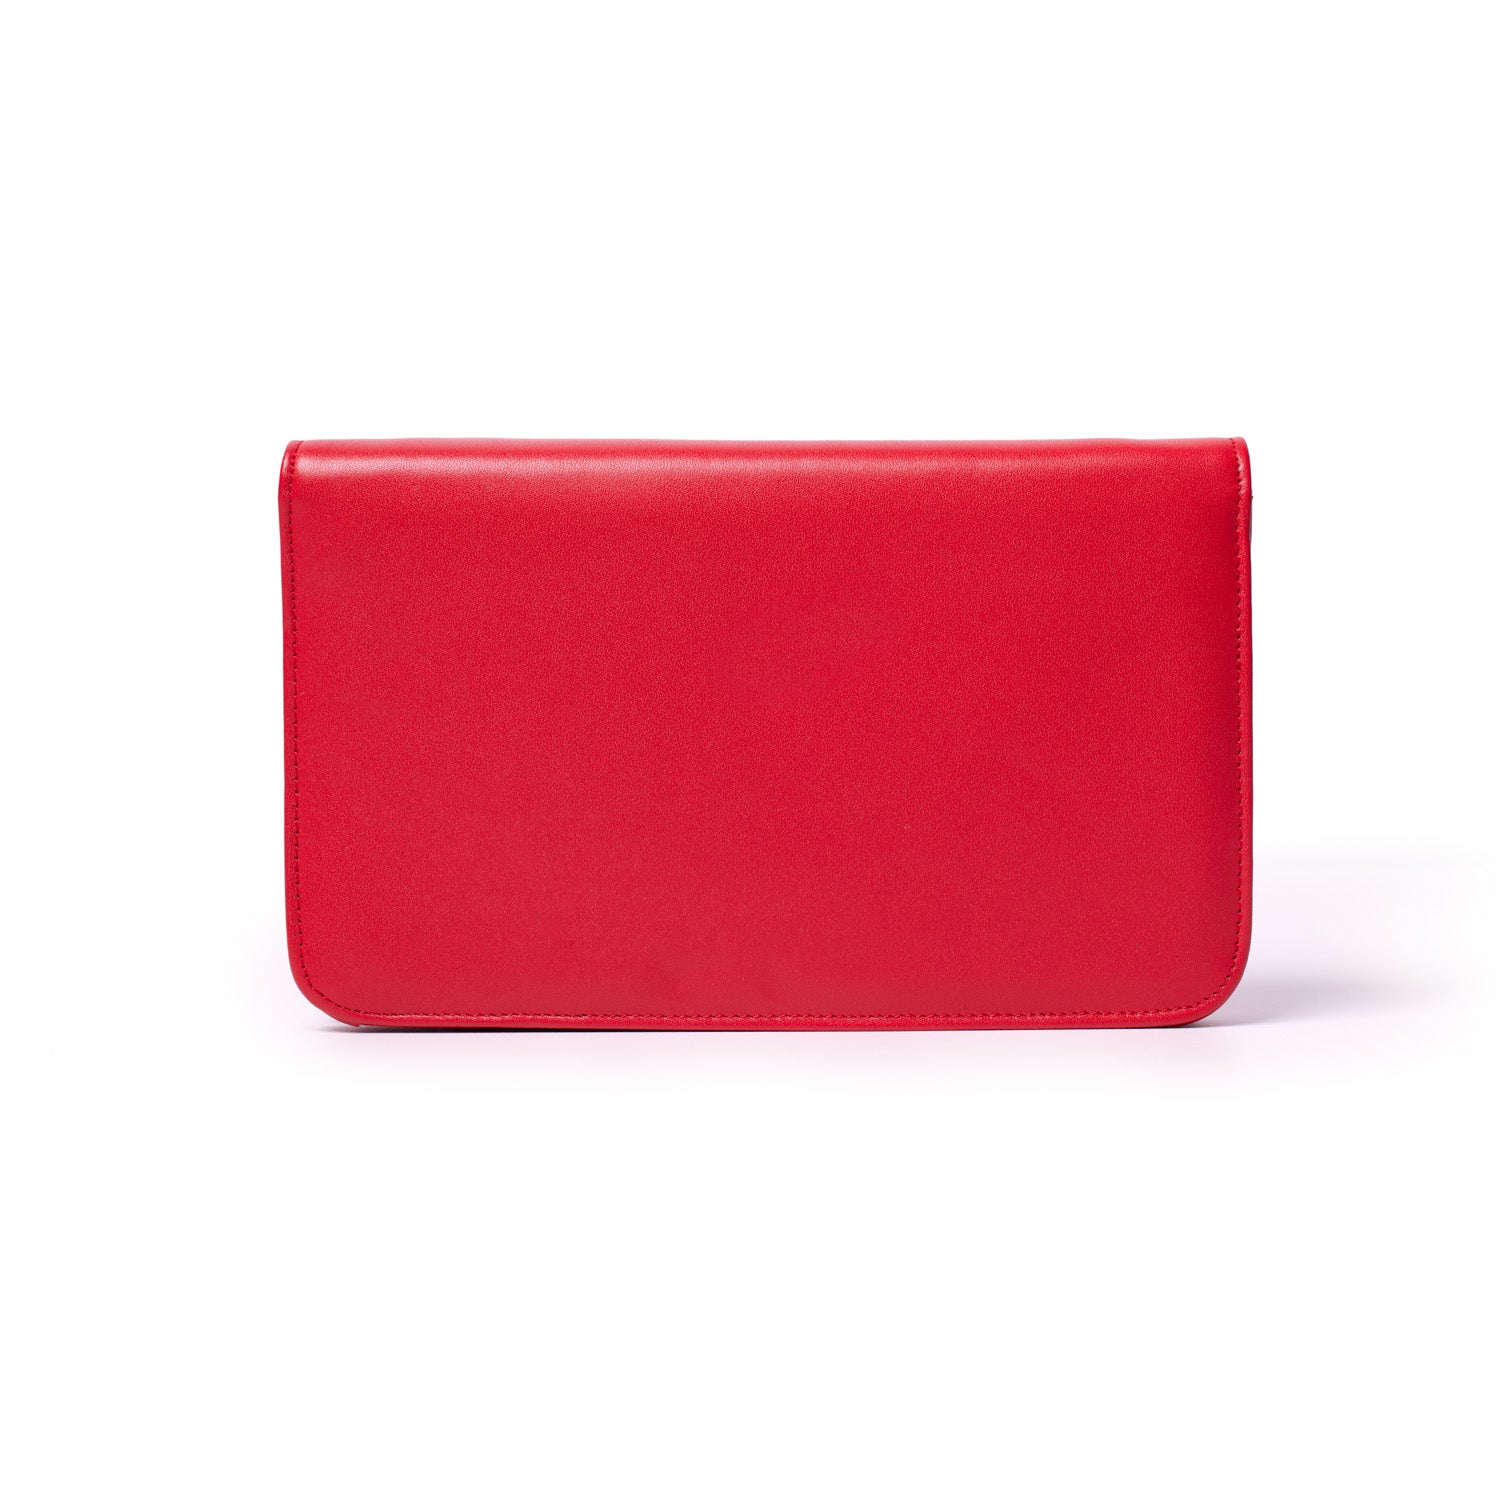 Kate Spade Wallets margaux Women PWRU7419611 Leather Red Chili Pepper 84€